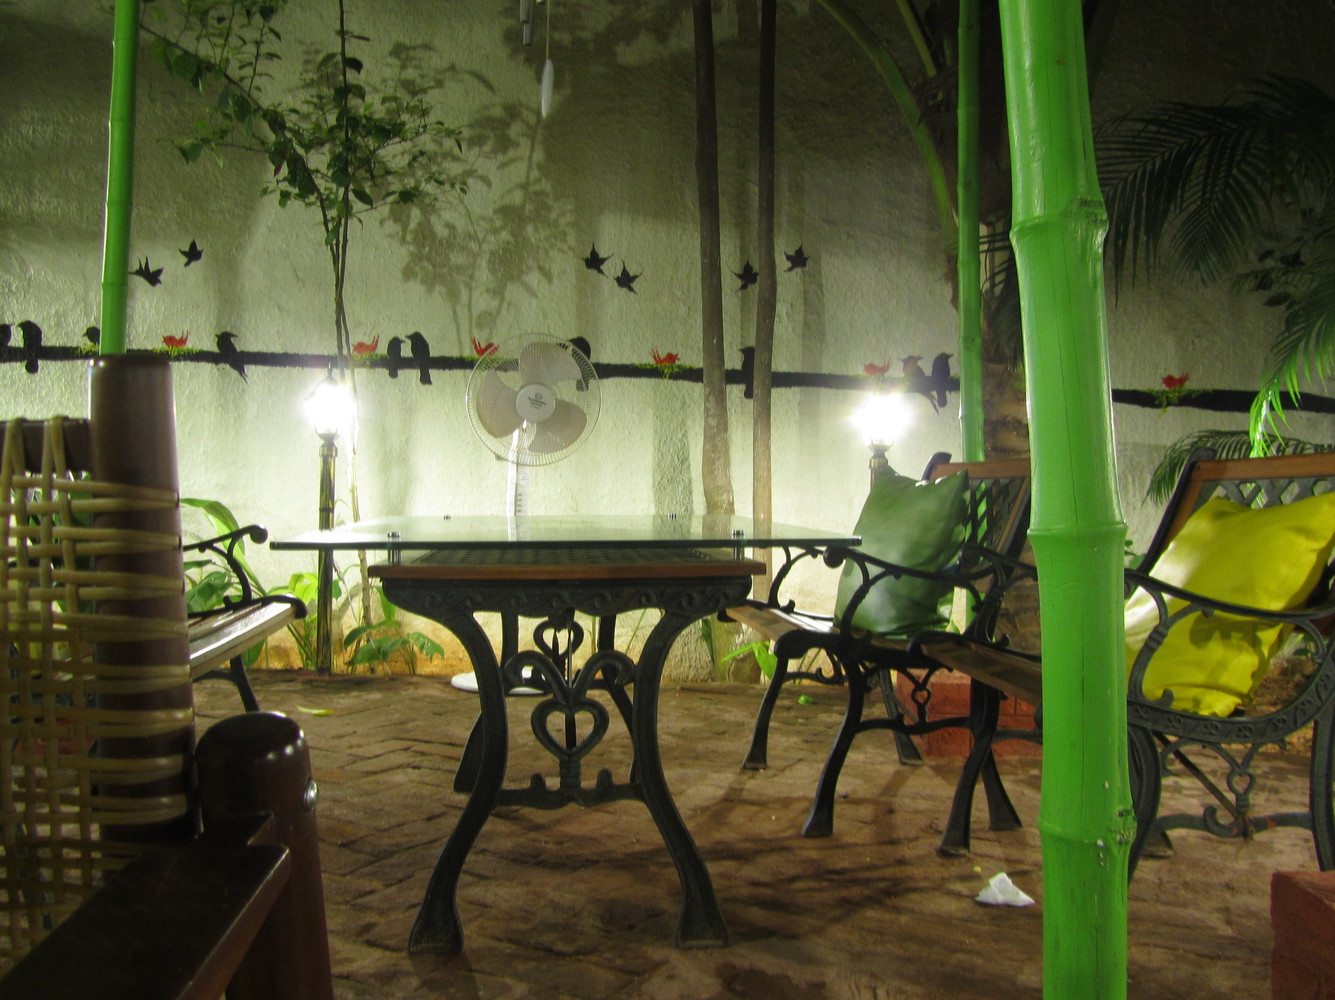 A restaurant with tables, chairs, bamboo sticks, a pedestal fan, and sketches of birds on a wall